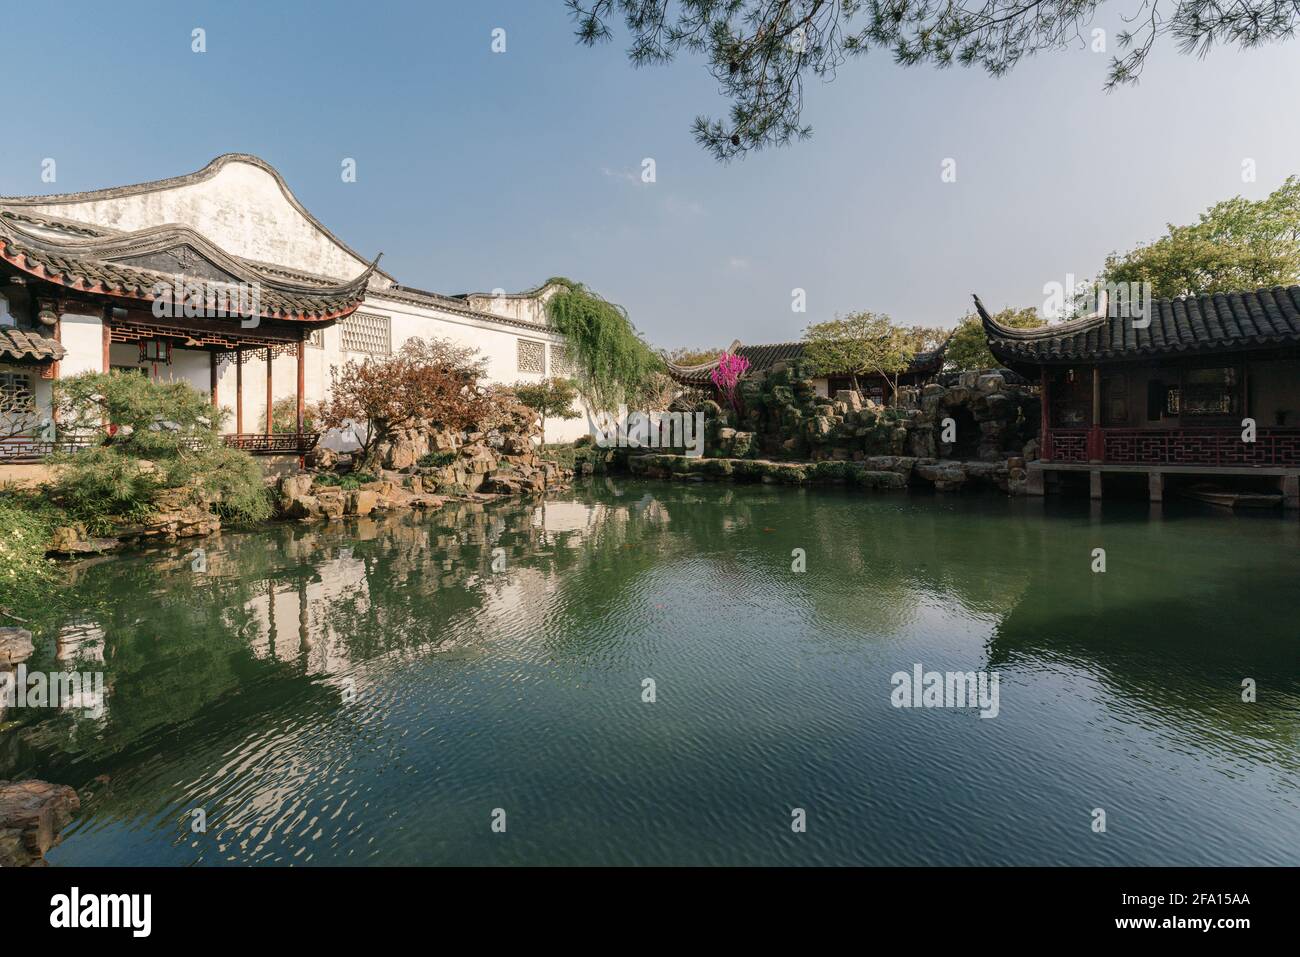 Landscape and buildings in Master of the Nets Garden, a classical Chinese garden in Suzhou, China Stock Photo